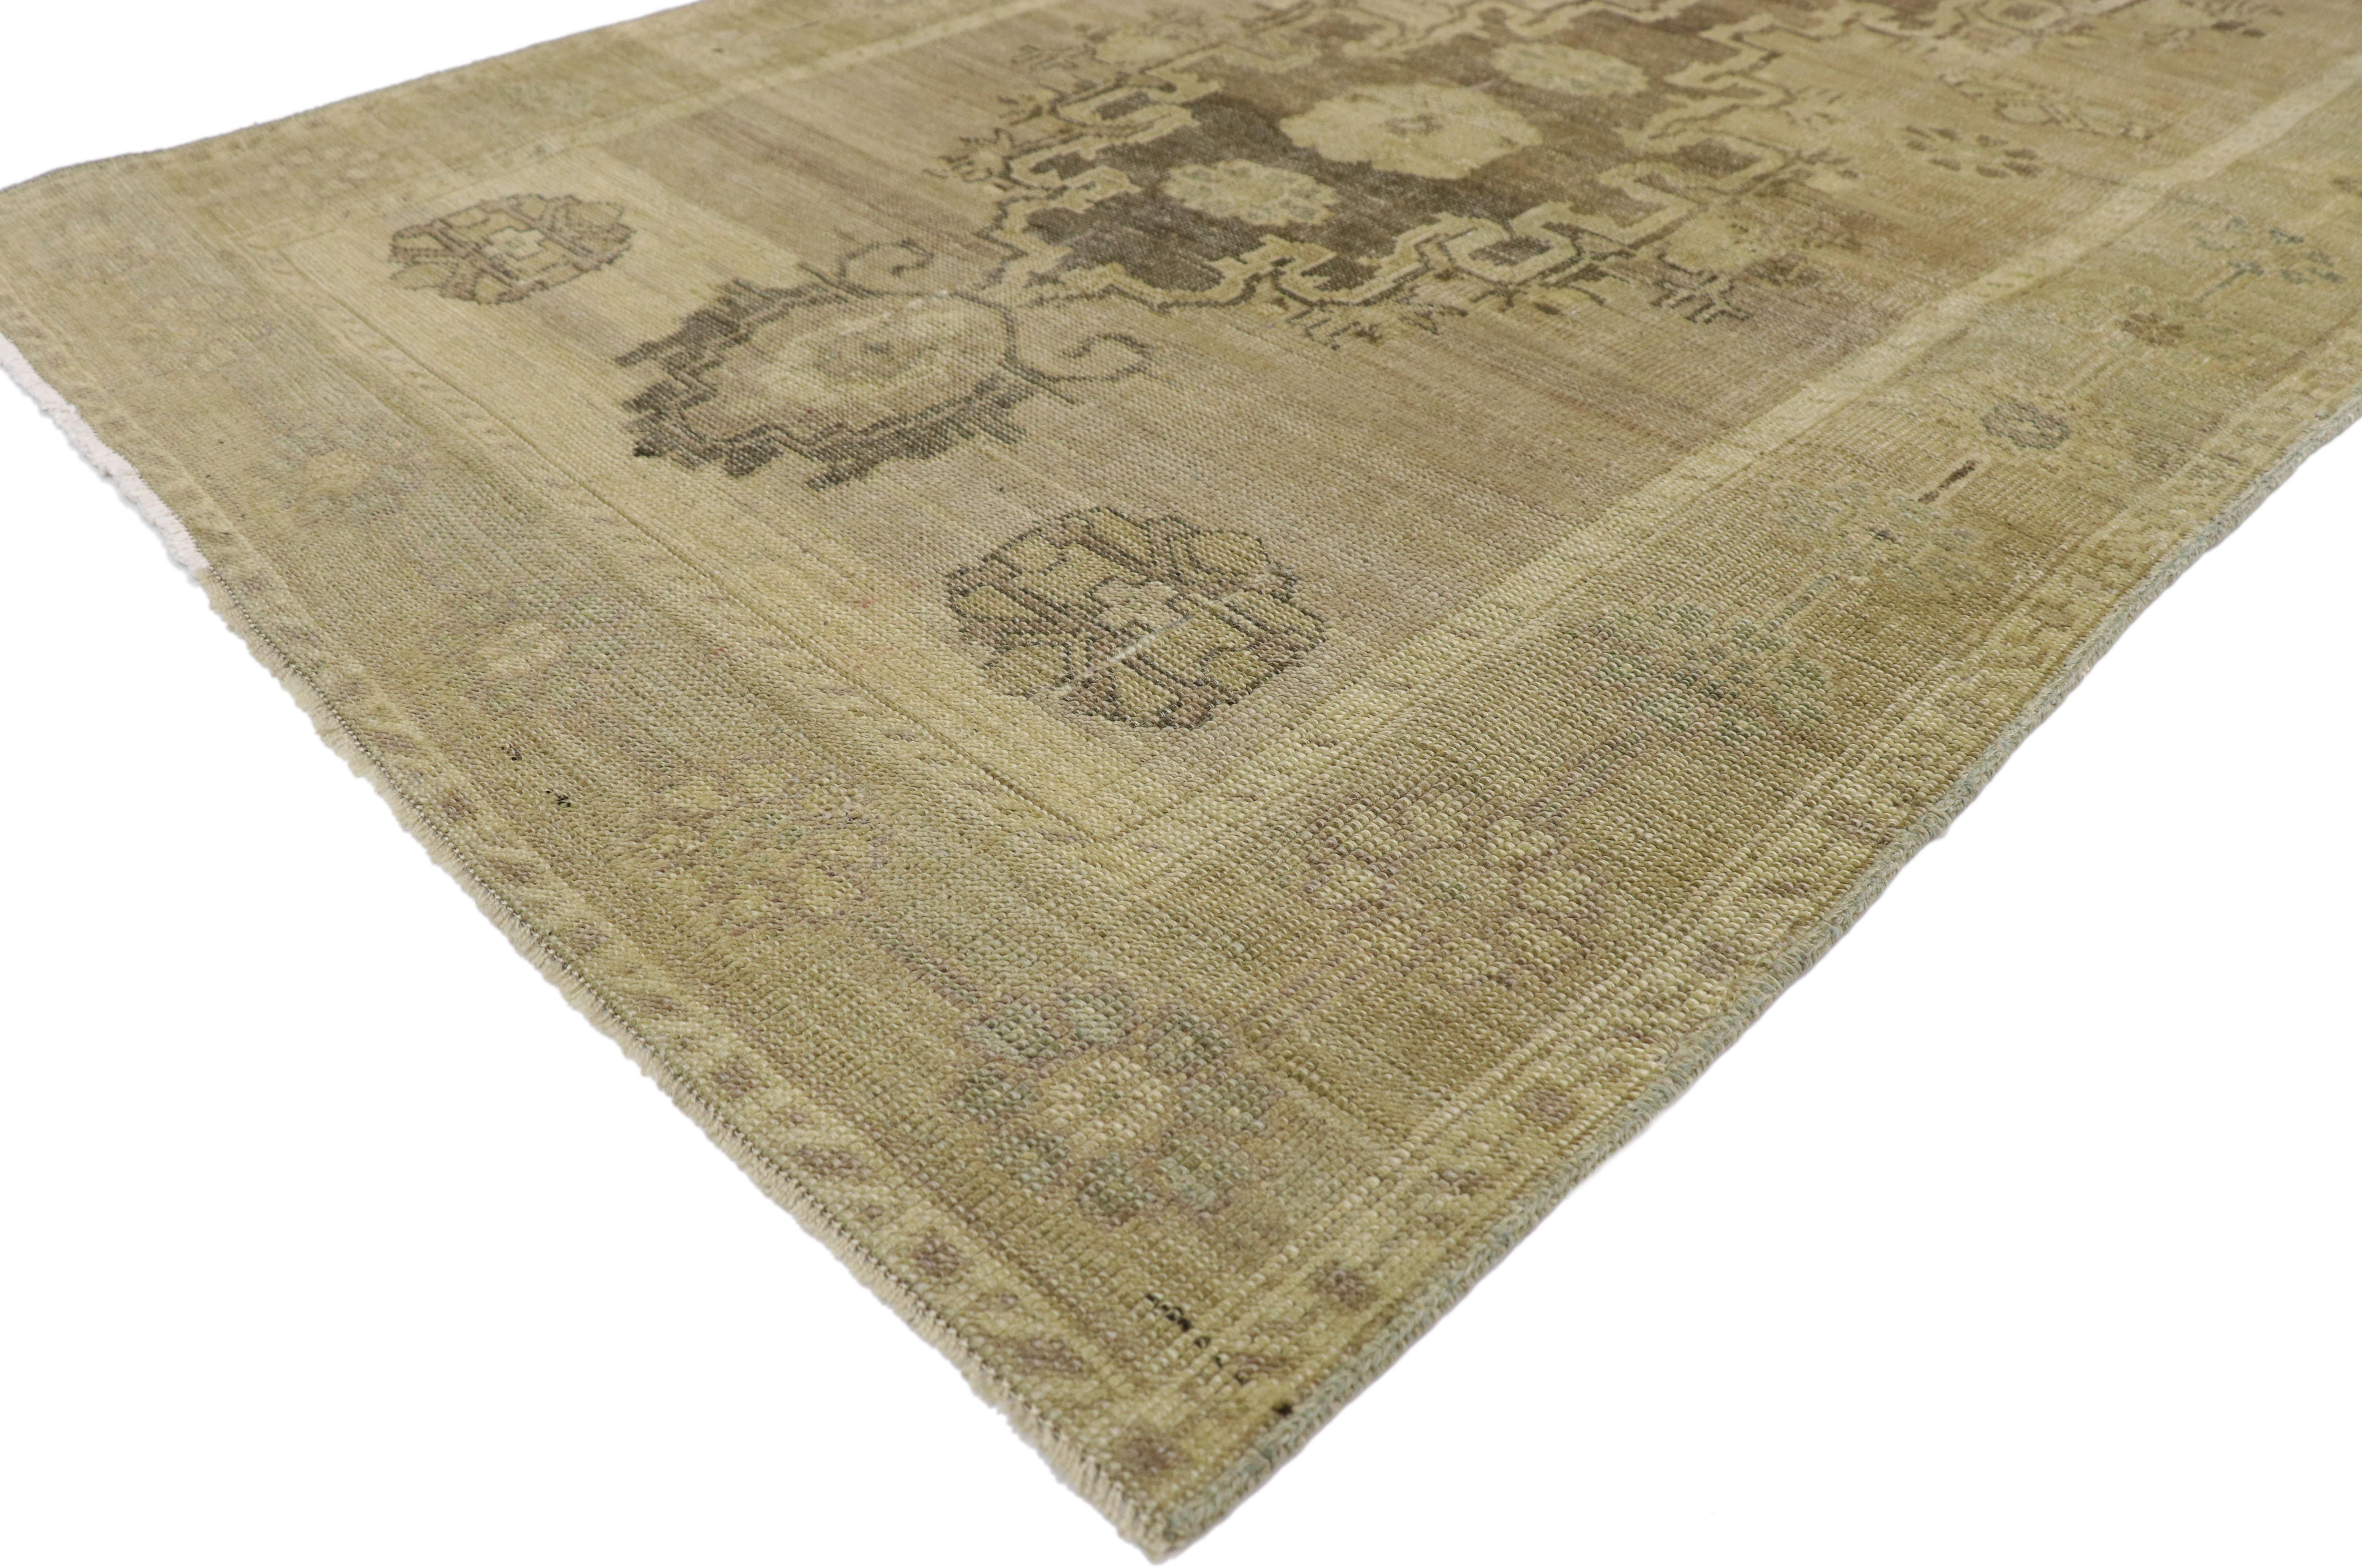 50838, vintage Turkish Oushak hallway runner with American colonial style. This hand knotted vintage Turkish Oushak runner features three cusped medallions, each filled with three roundel rosettes and outlined with a thick vine and serrated